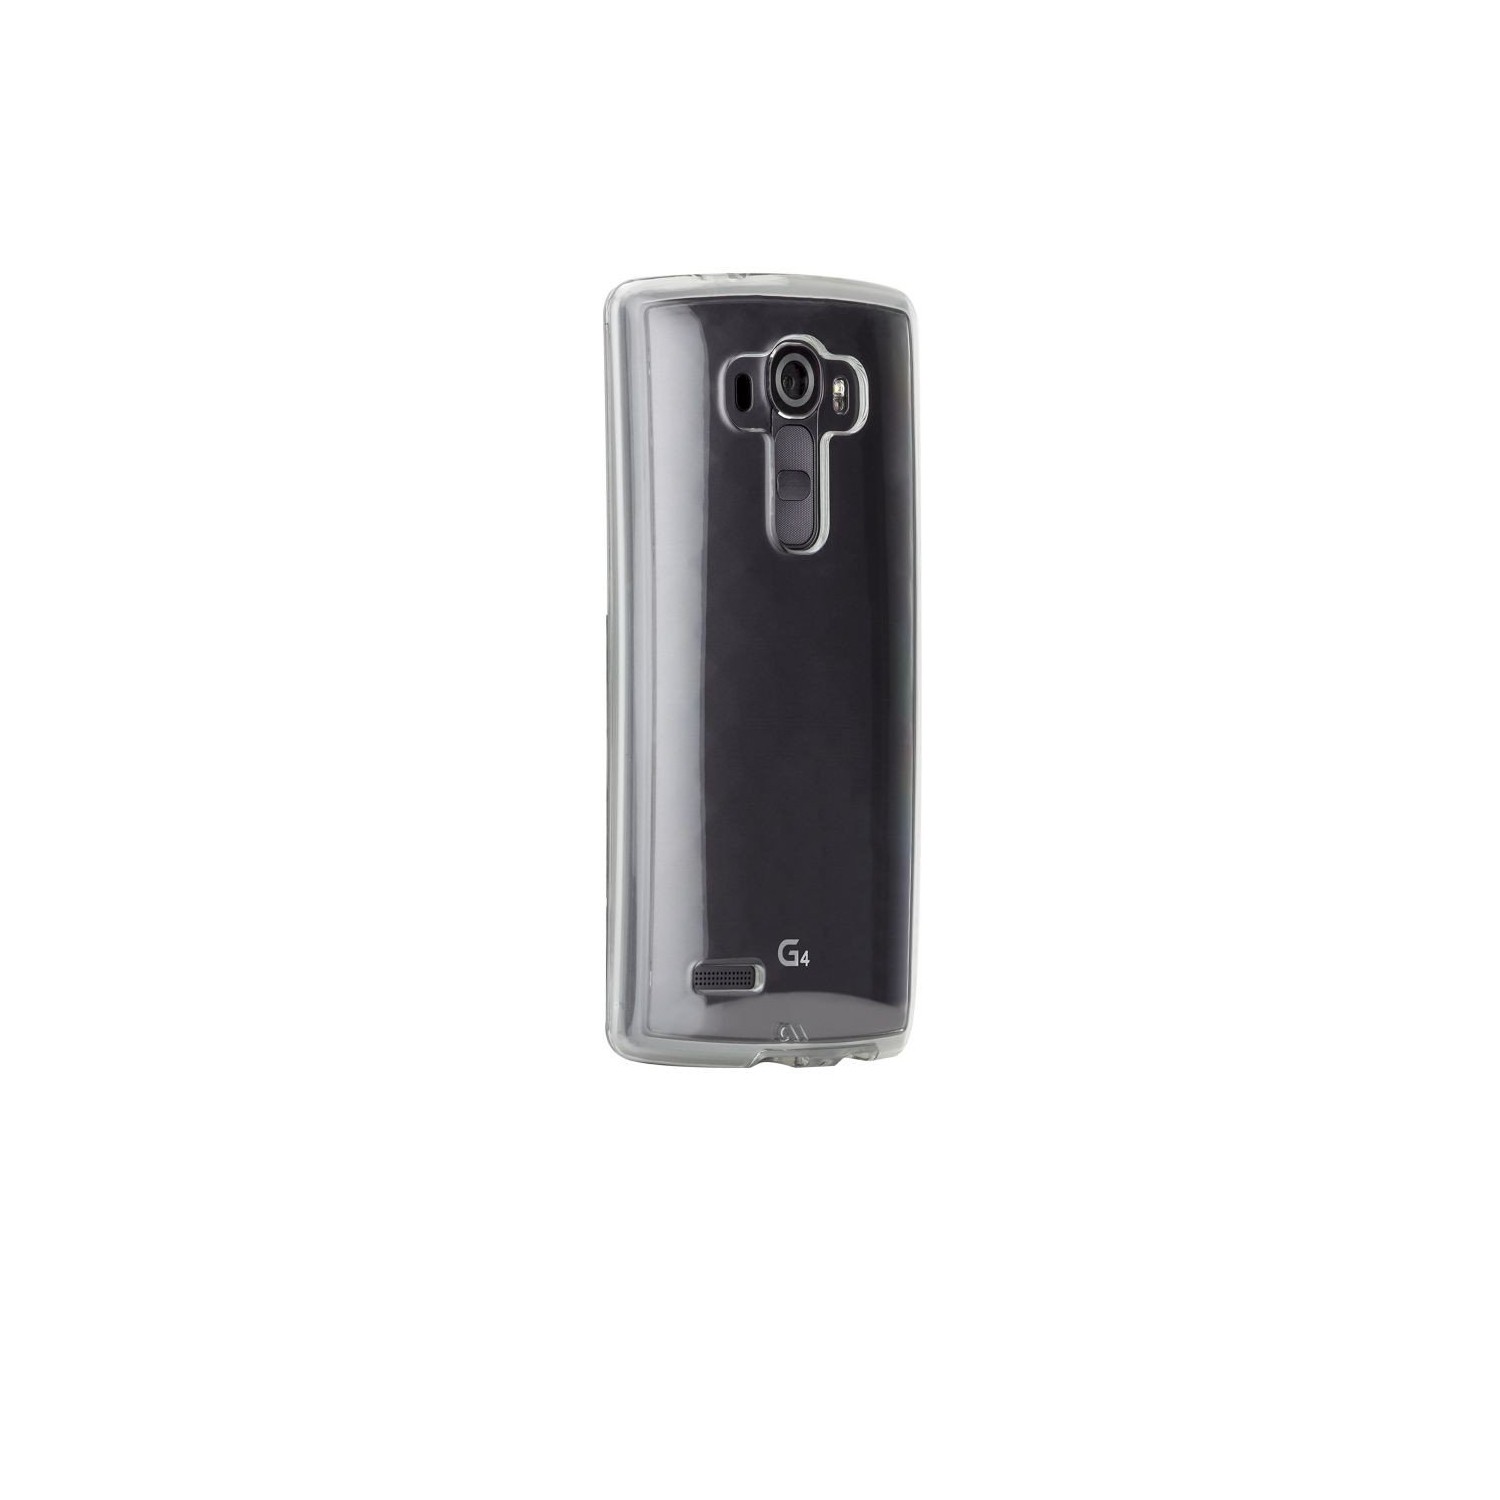 Case-Mate Fitted Hard Shell Case for LG G4 - Clear